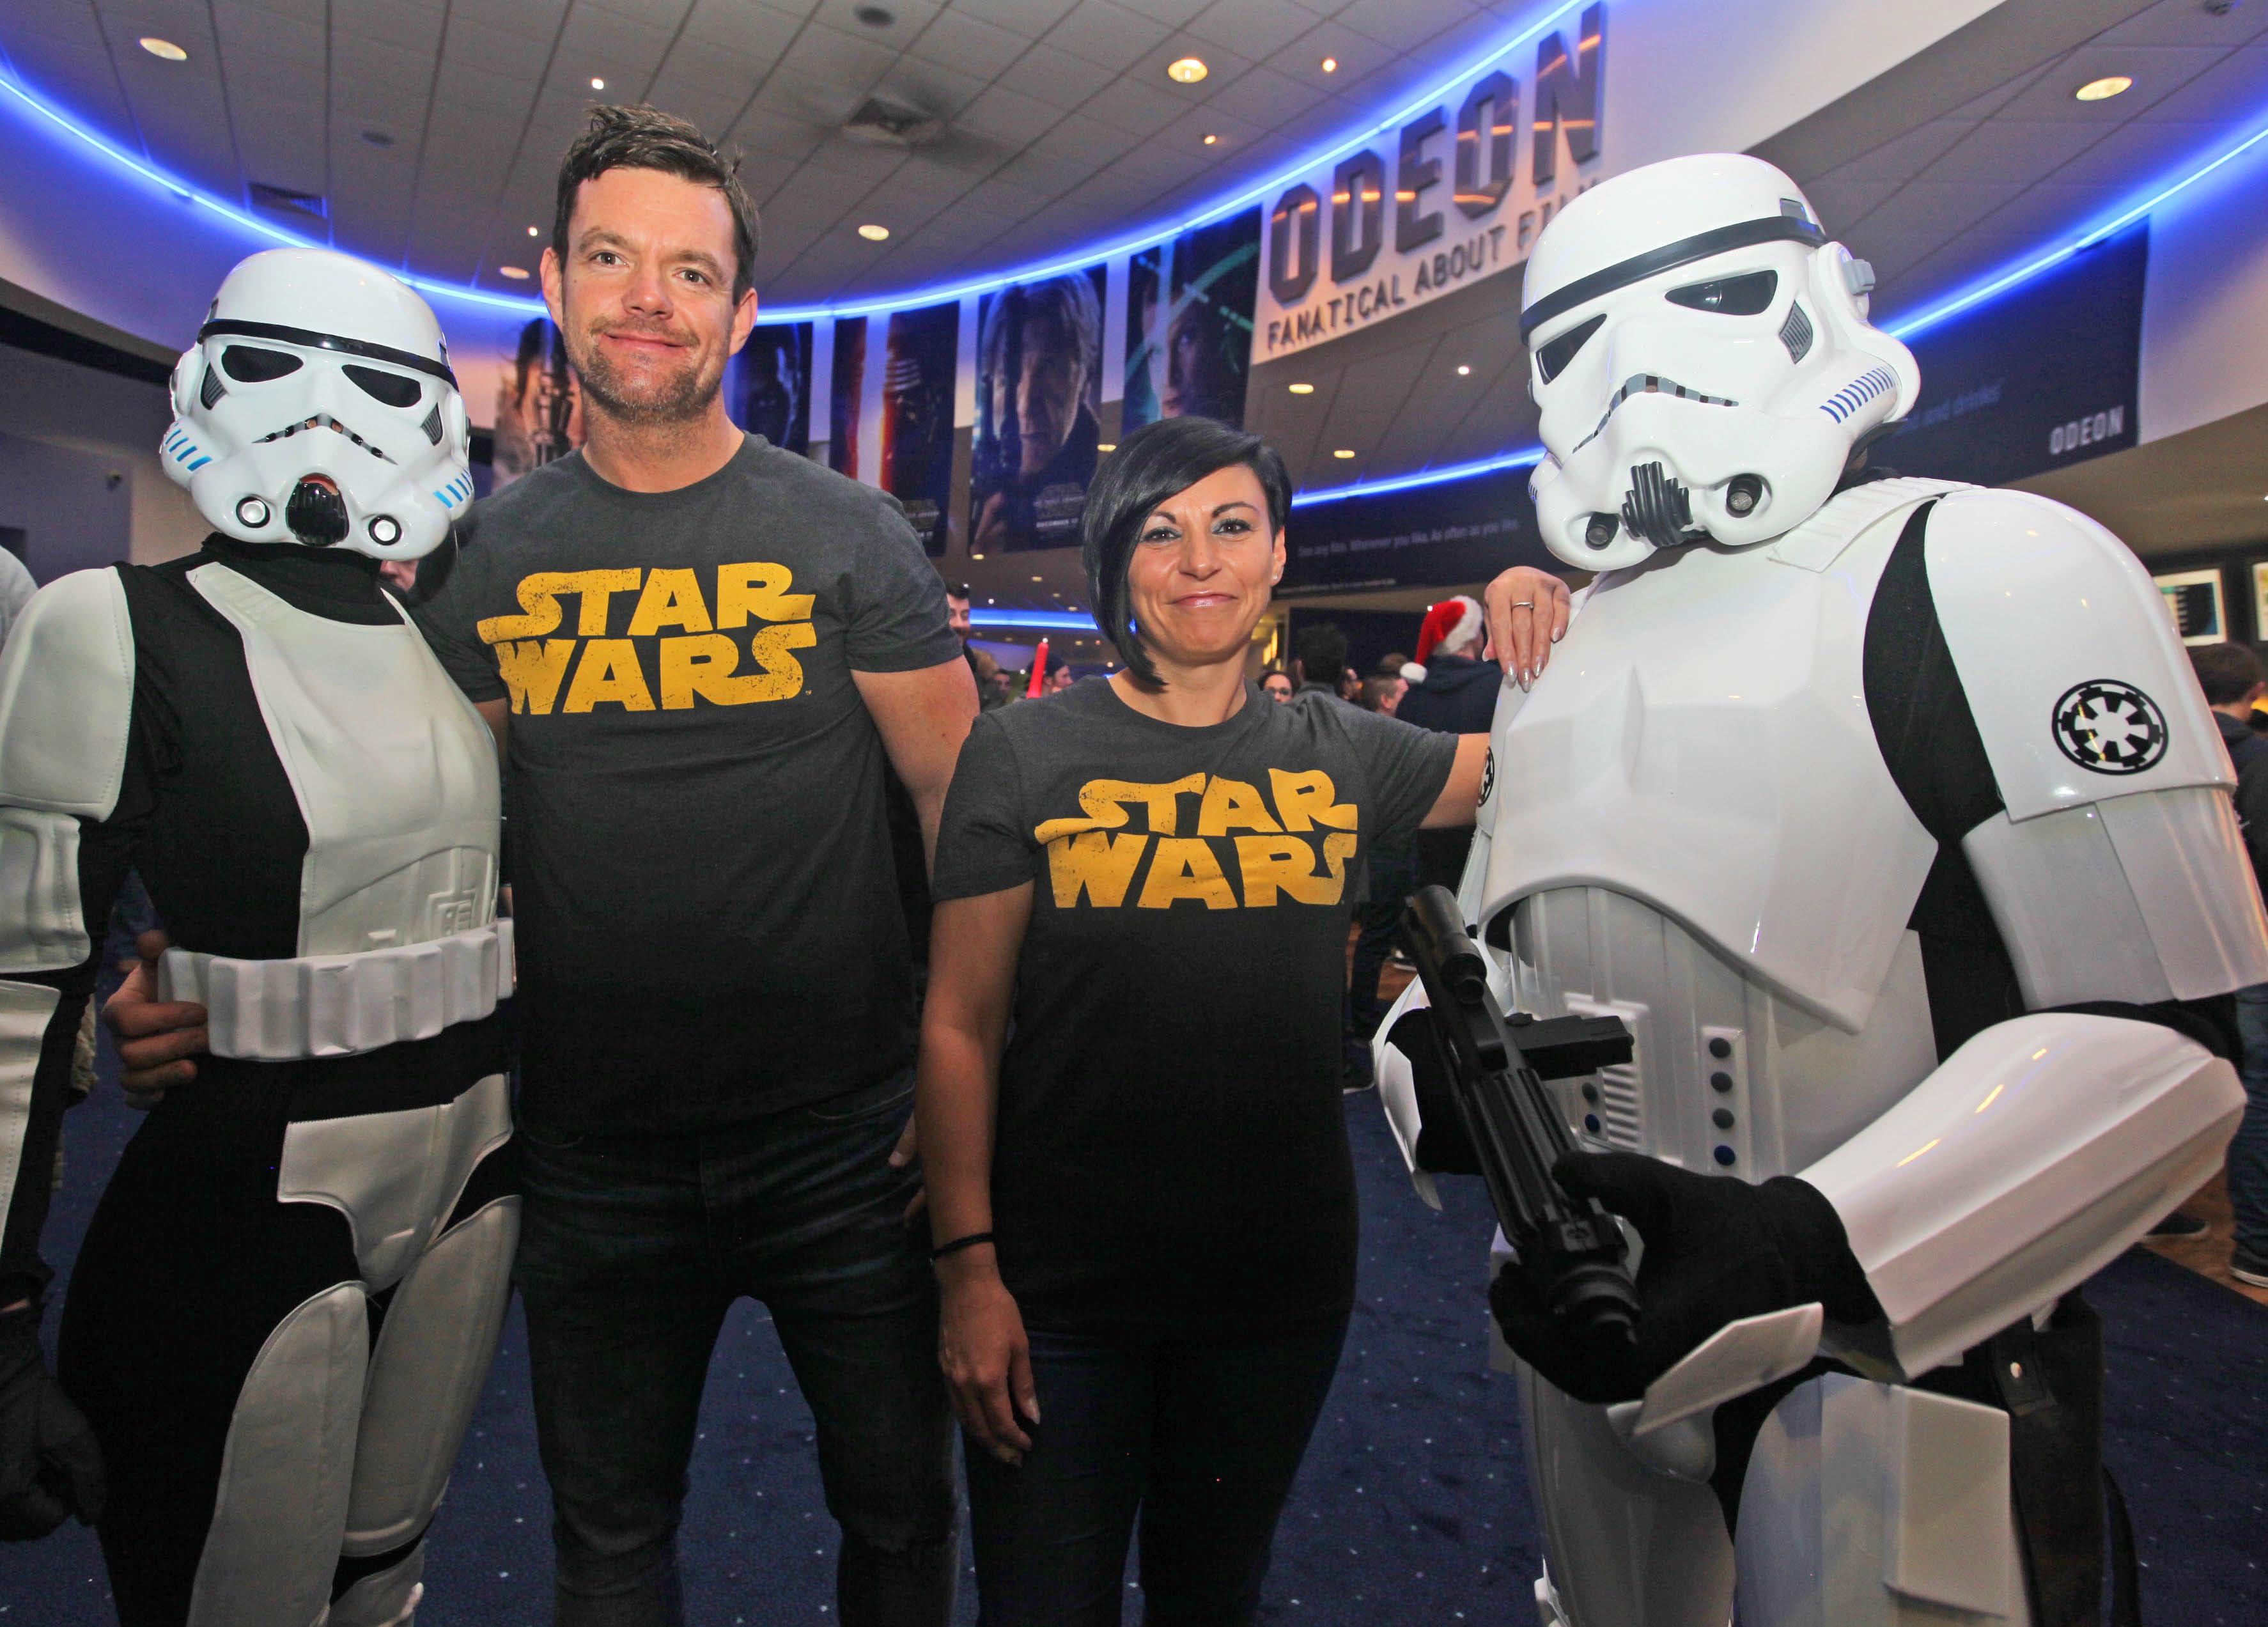 Star Wars movie is a huge hit – oh yes it is!